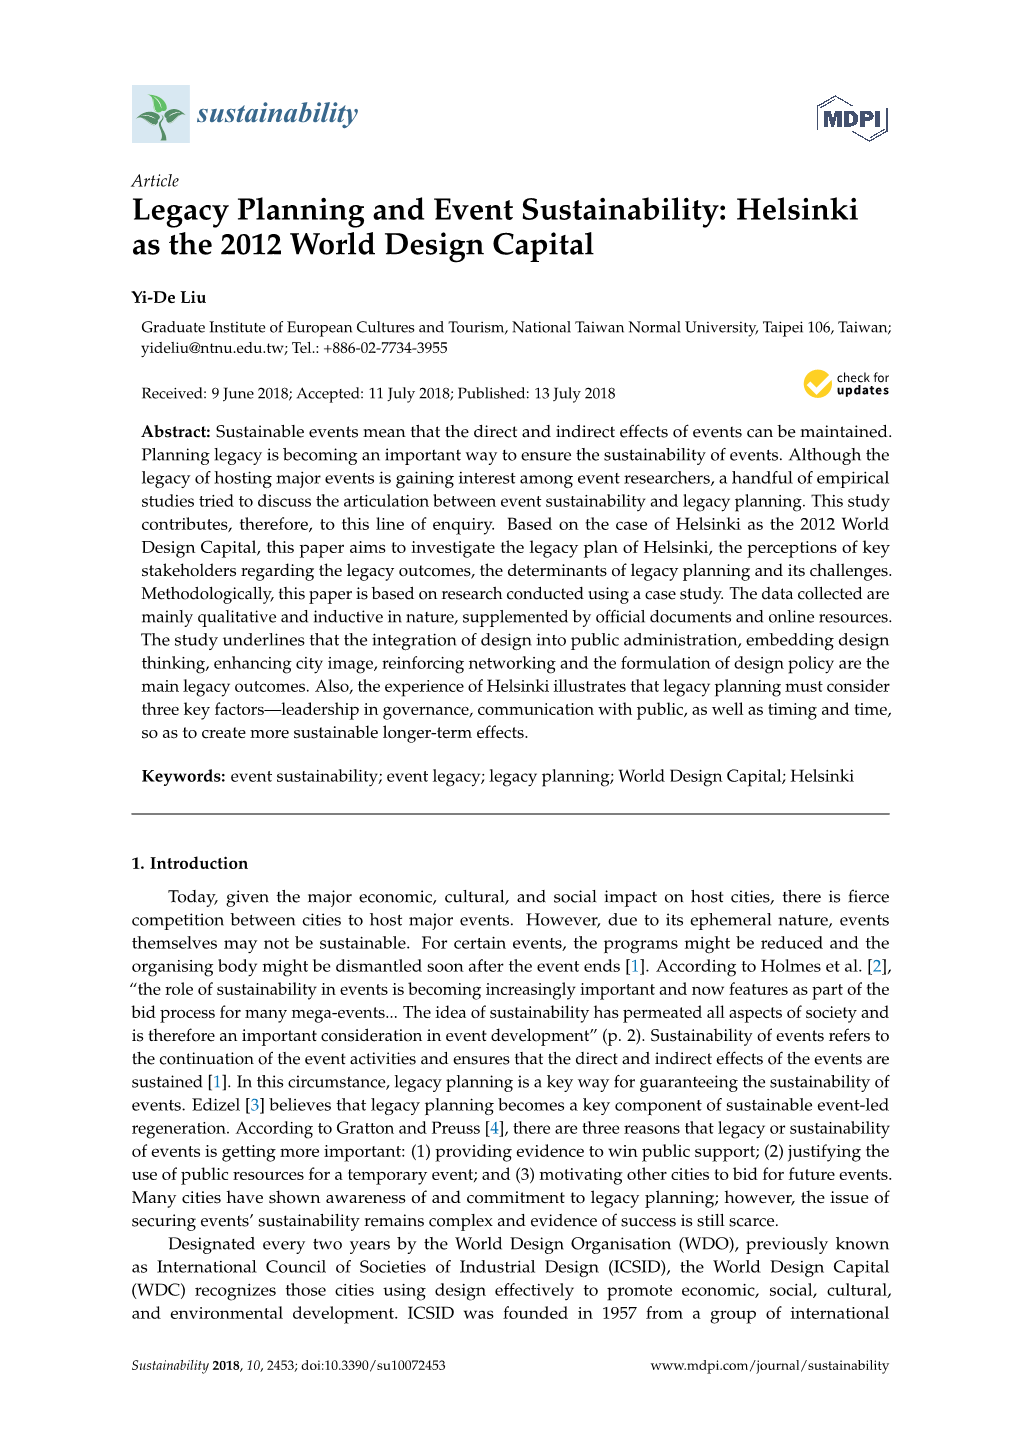 Legacy Planning and Event Sustainability: Helsinki As the 2012 World Design Capital